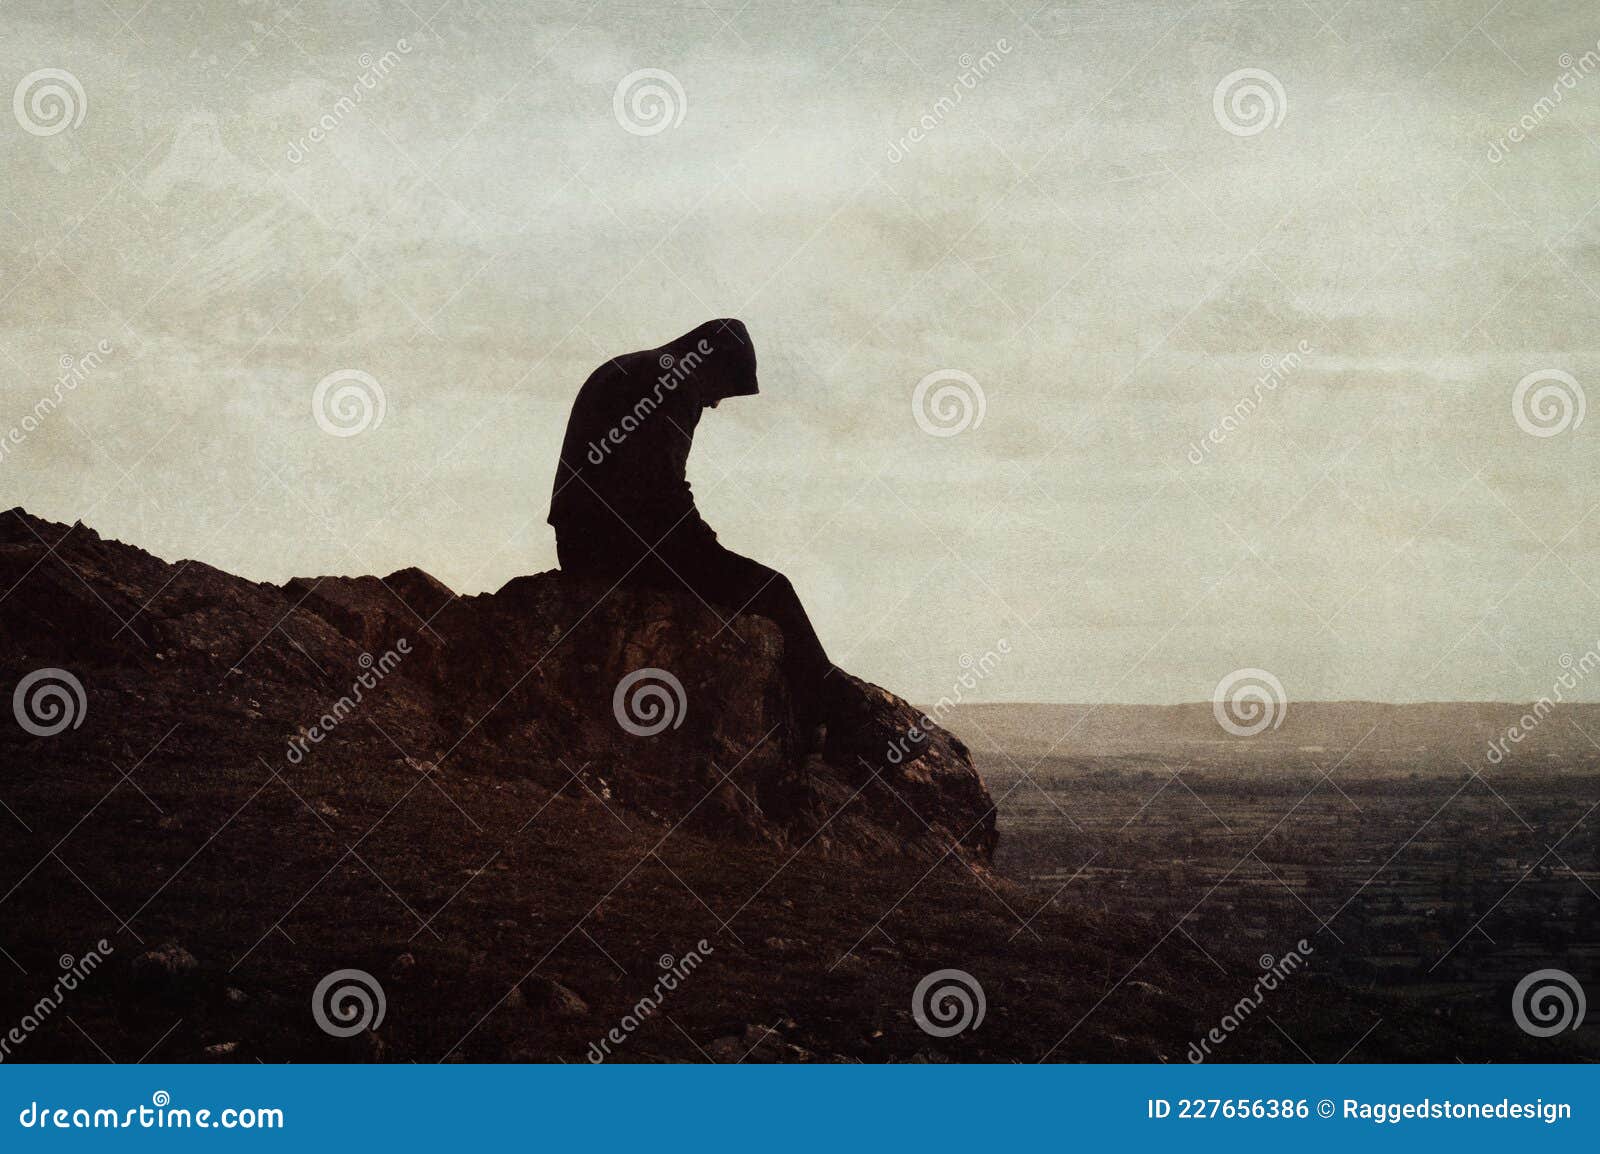 A Mental Health Concept of a Sad Lonely Hooded Figure Sitting on Top of ...